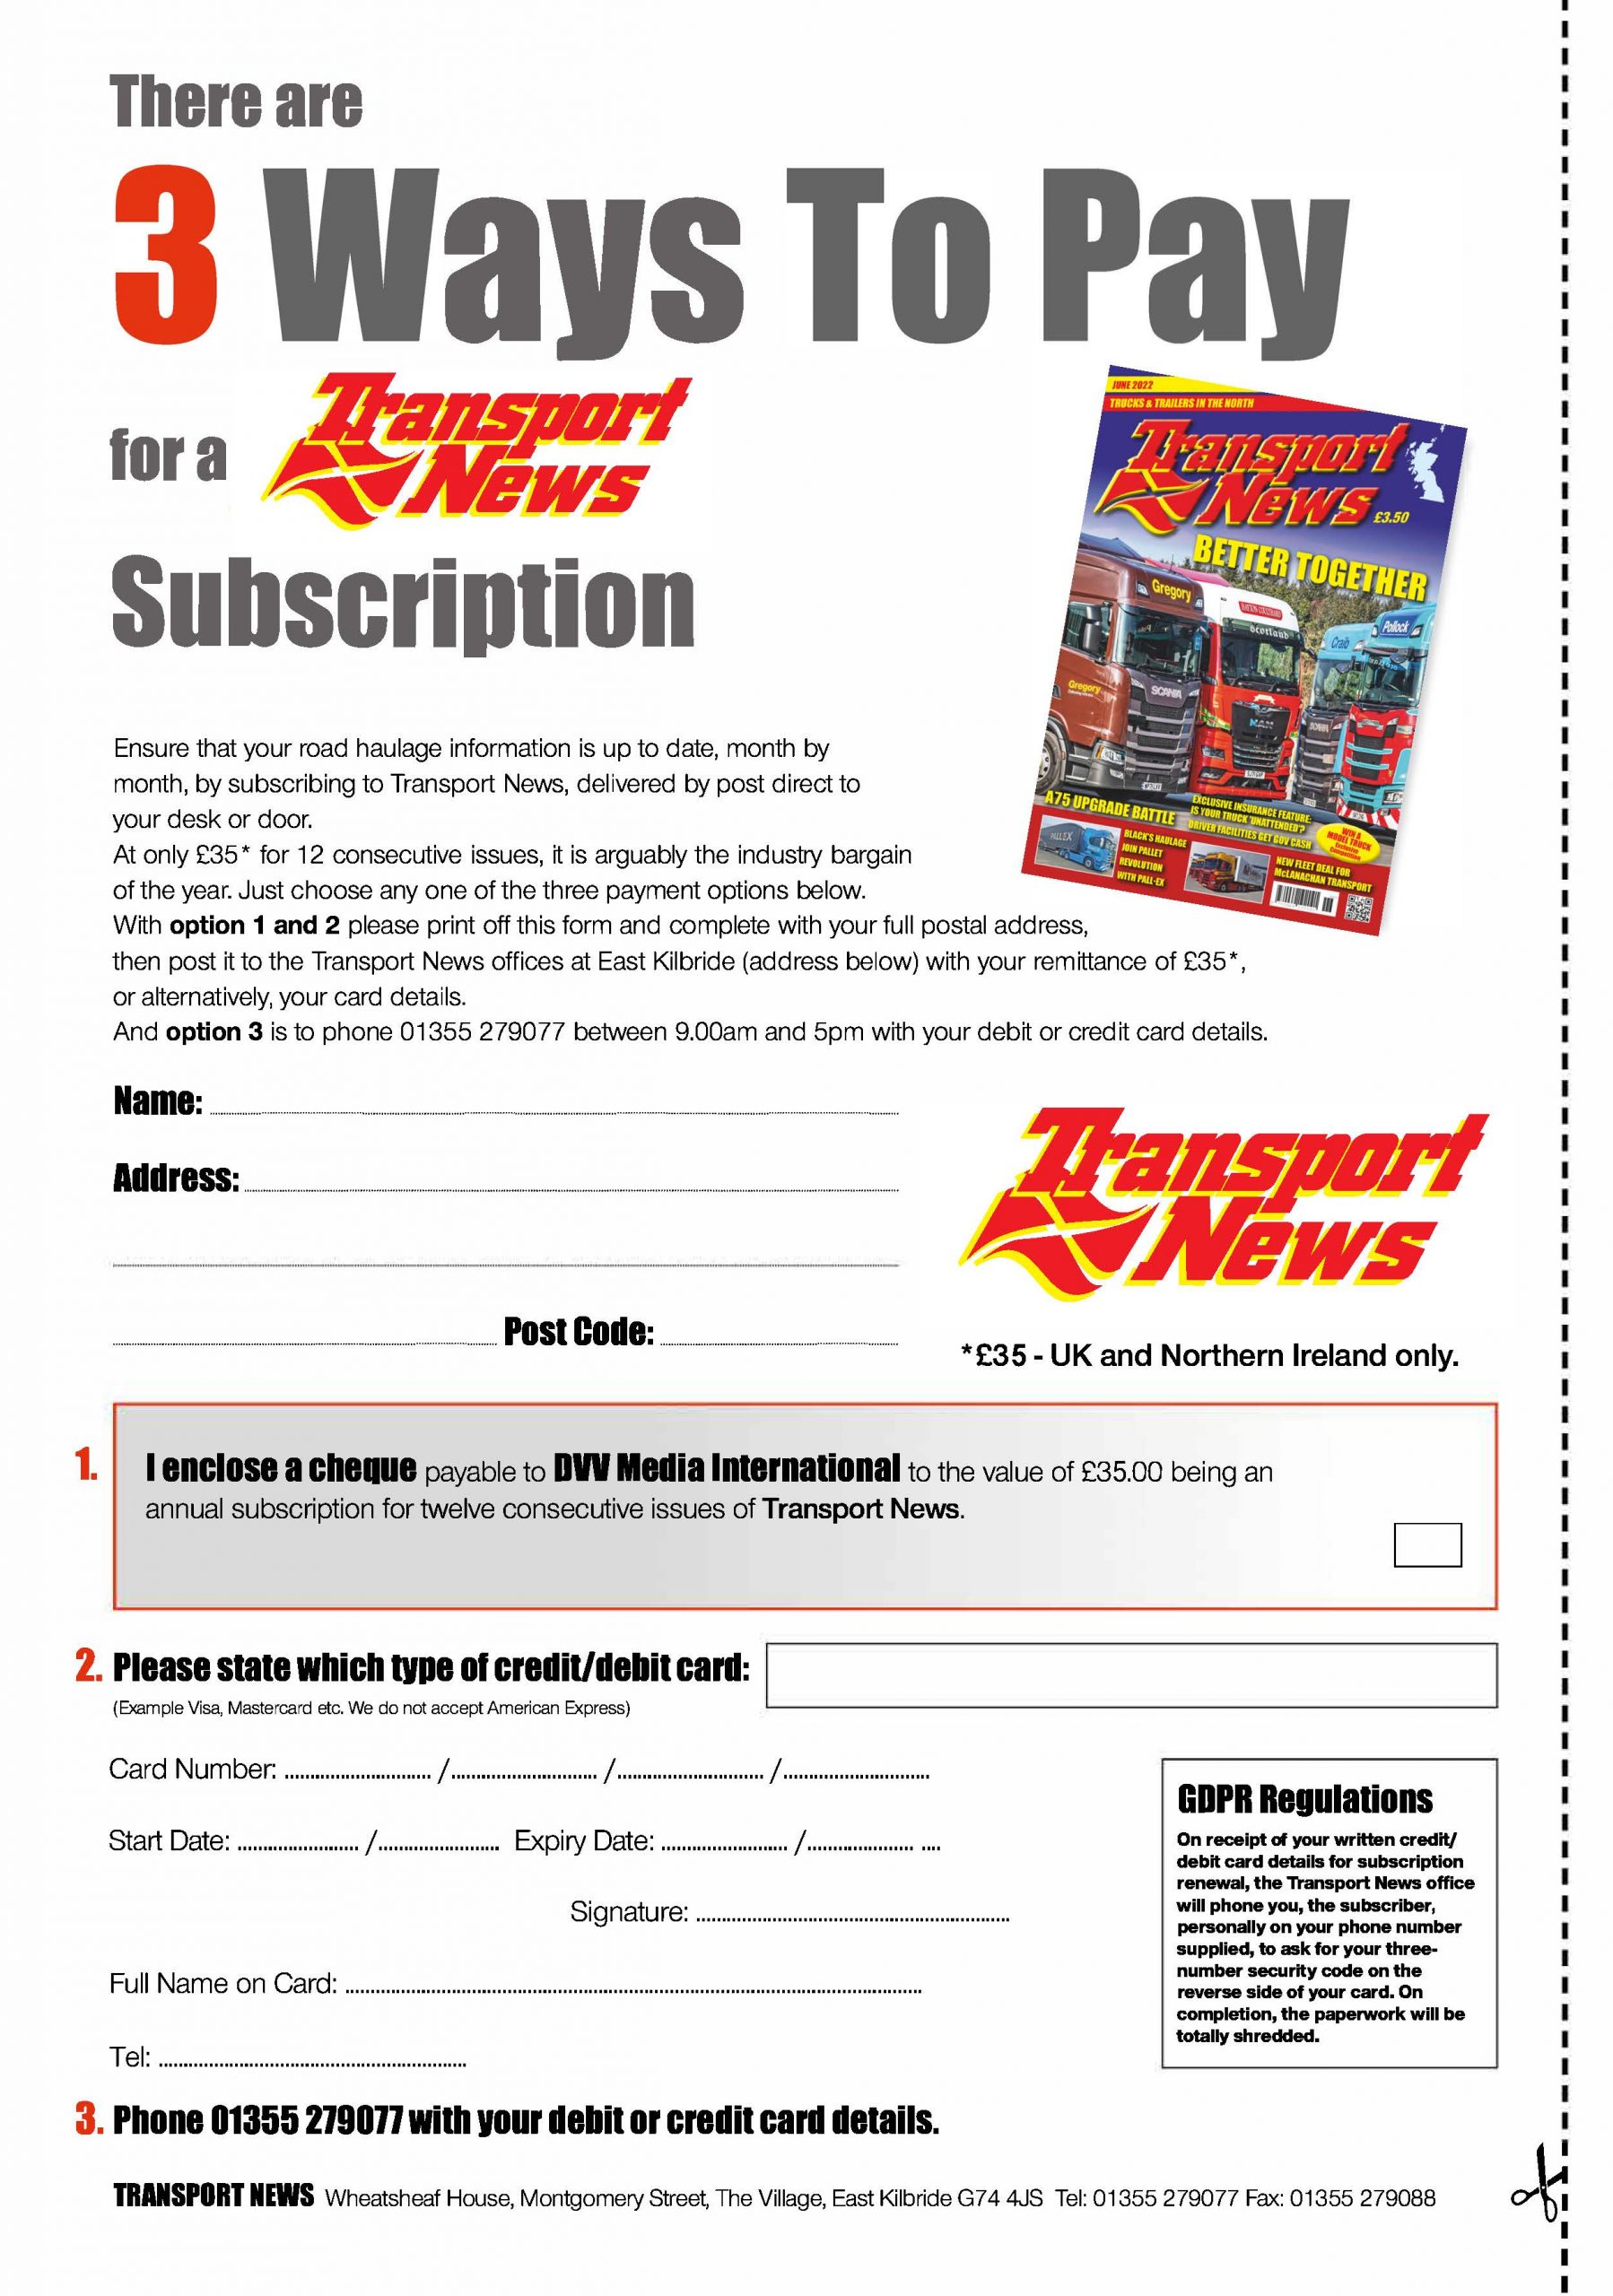 Subscribe to Transport News